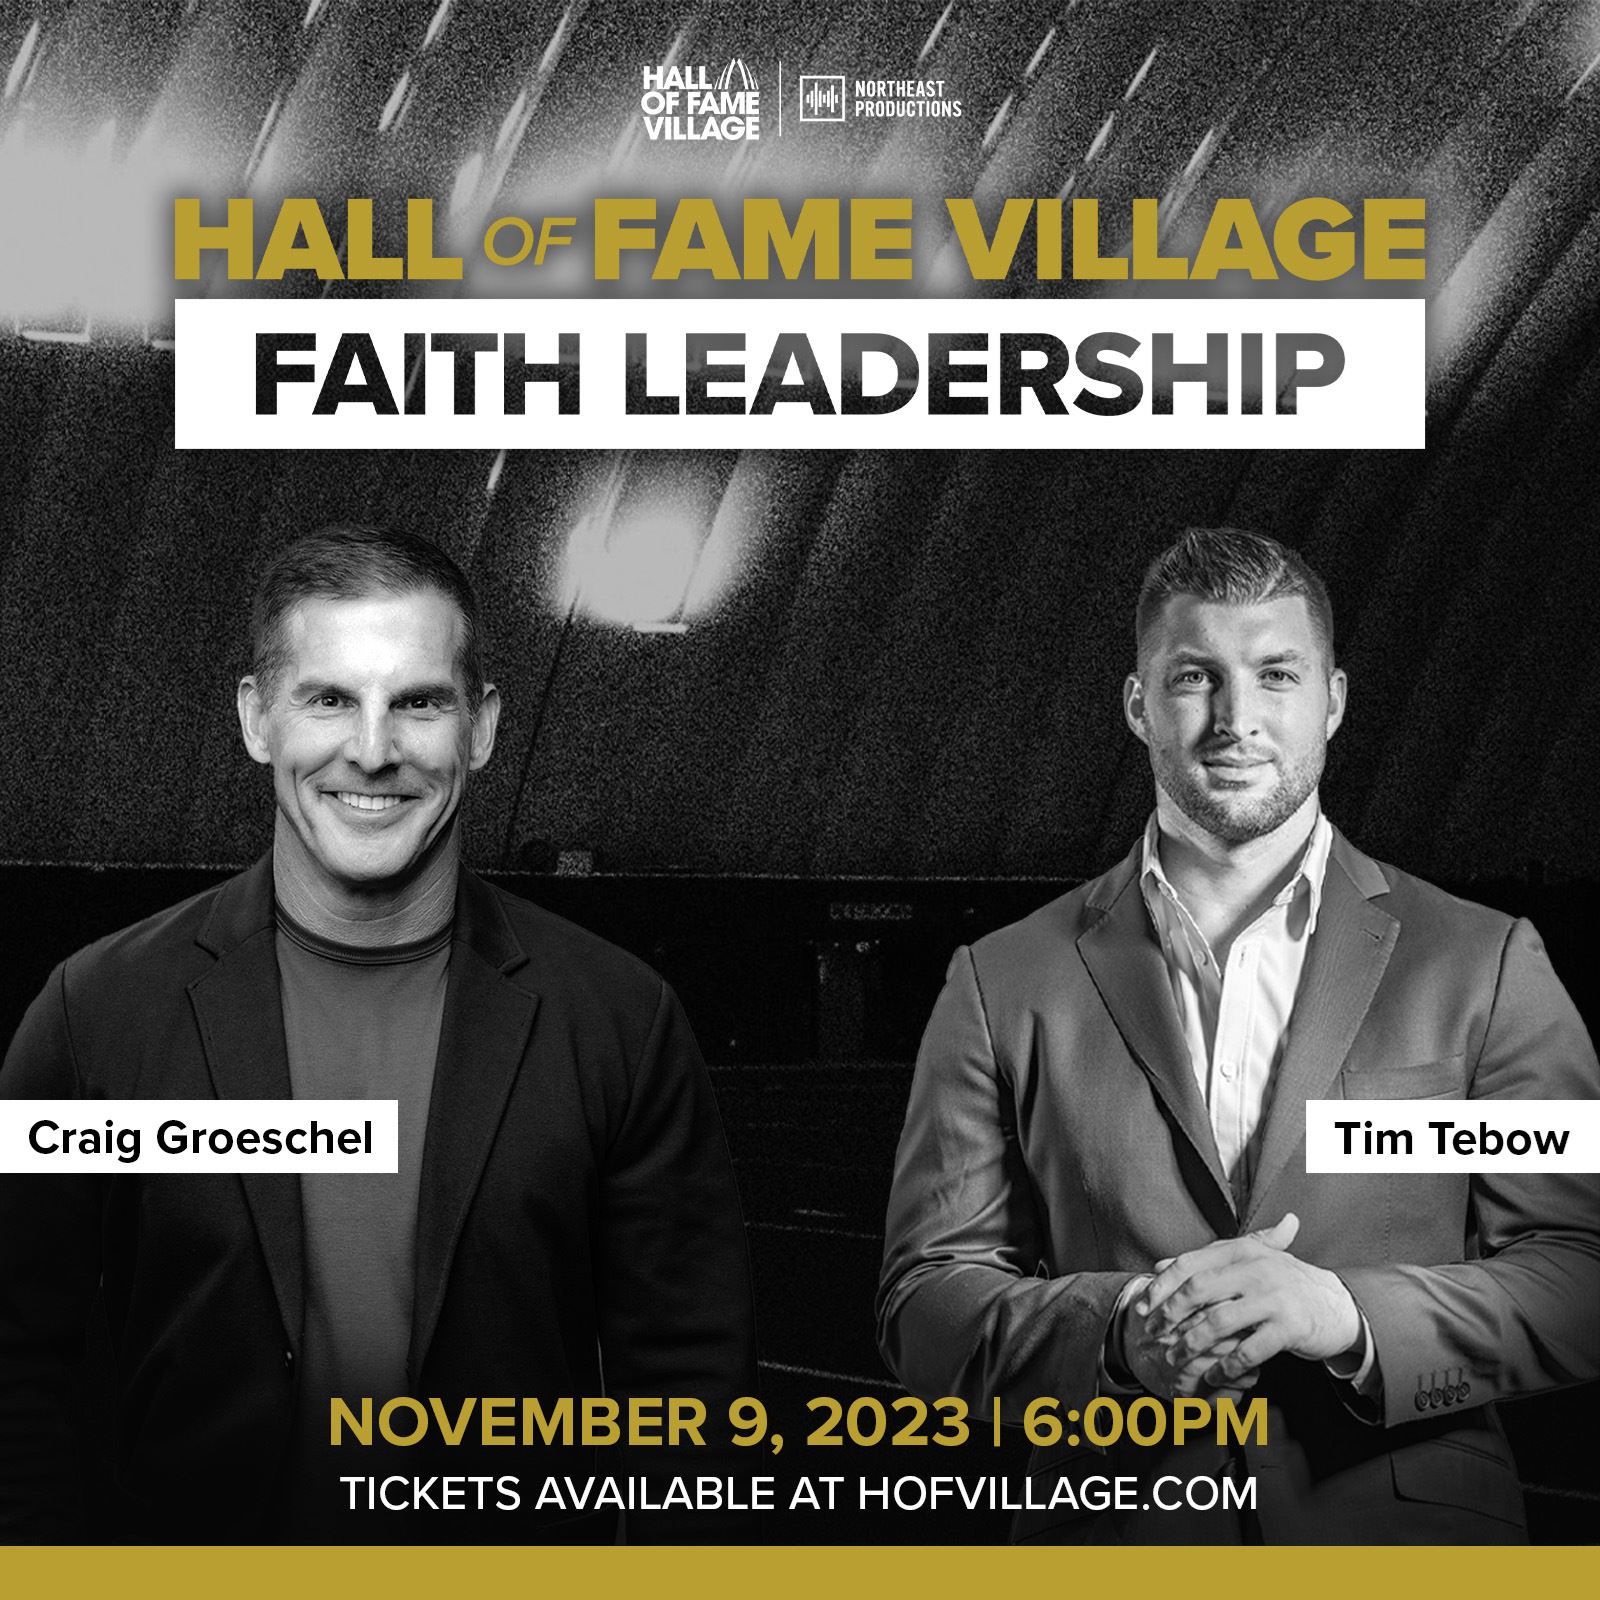 Hall Of Fame Village To Host Faith Leadership Event Featuring Craig Groeschel And Tim Tebow On November 9